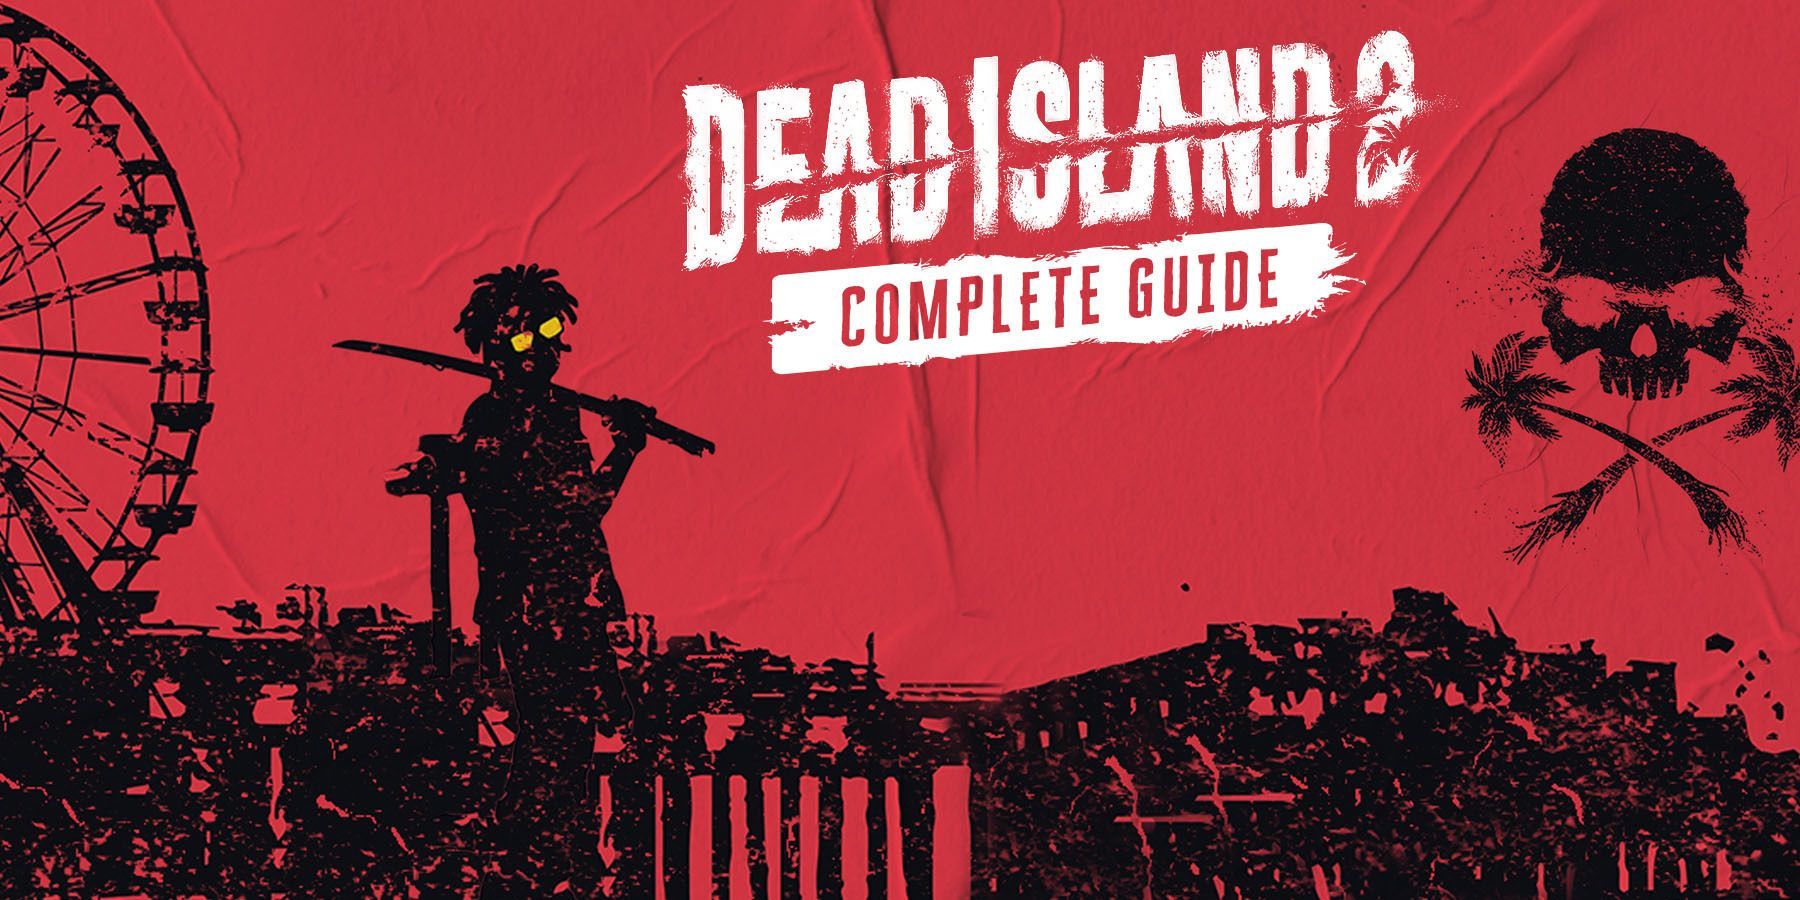 Dead Island 2: Complete Guide | Key Locations, Quest Walkthroughs, Boss Fights, Weapons, & More